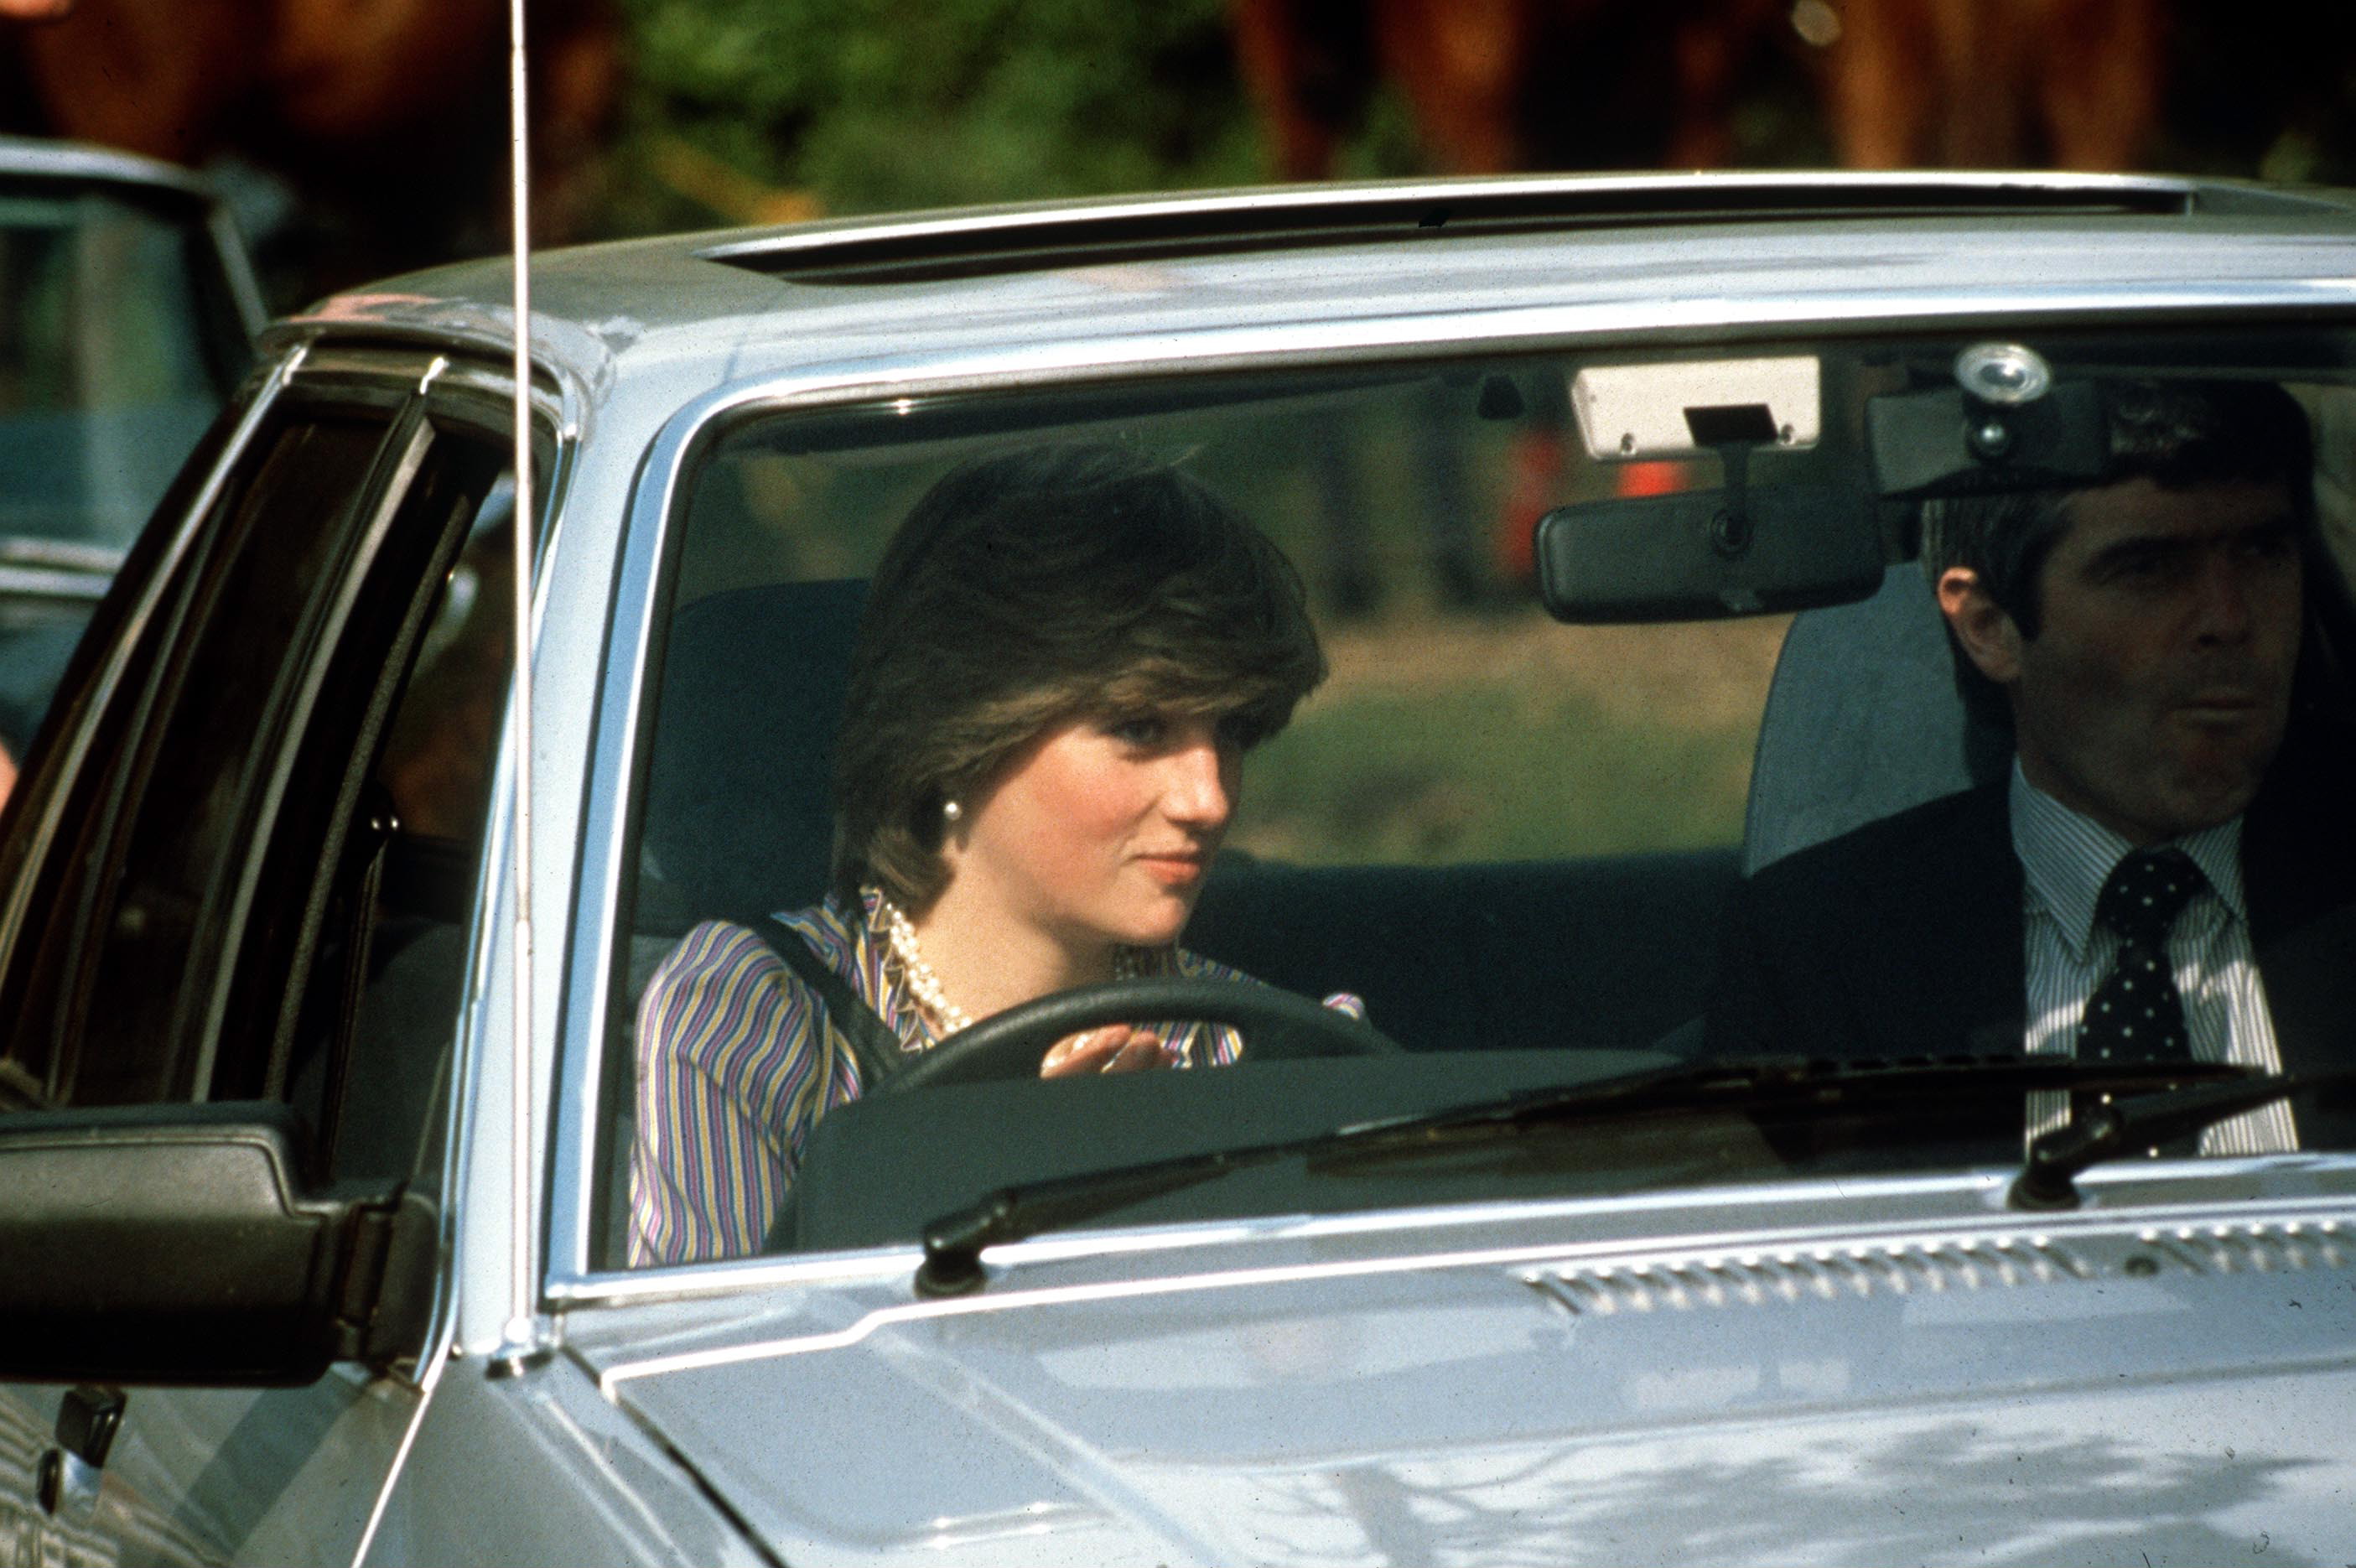 Lady Diana Spencer (Princess Diana) driving her Ford Escort at The Guards Polo Club